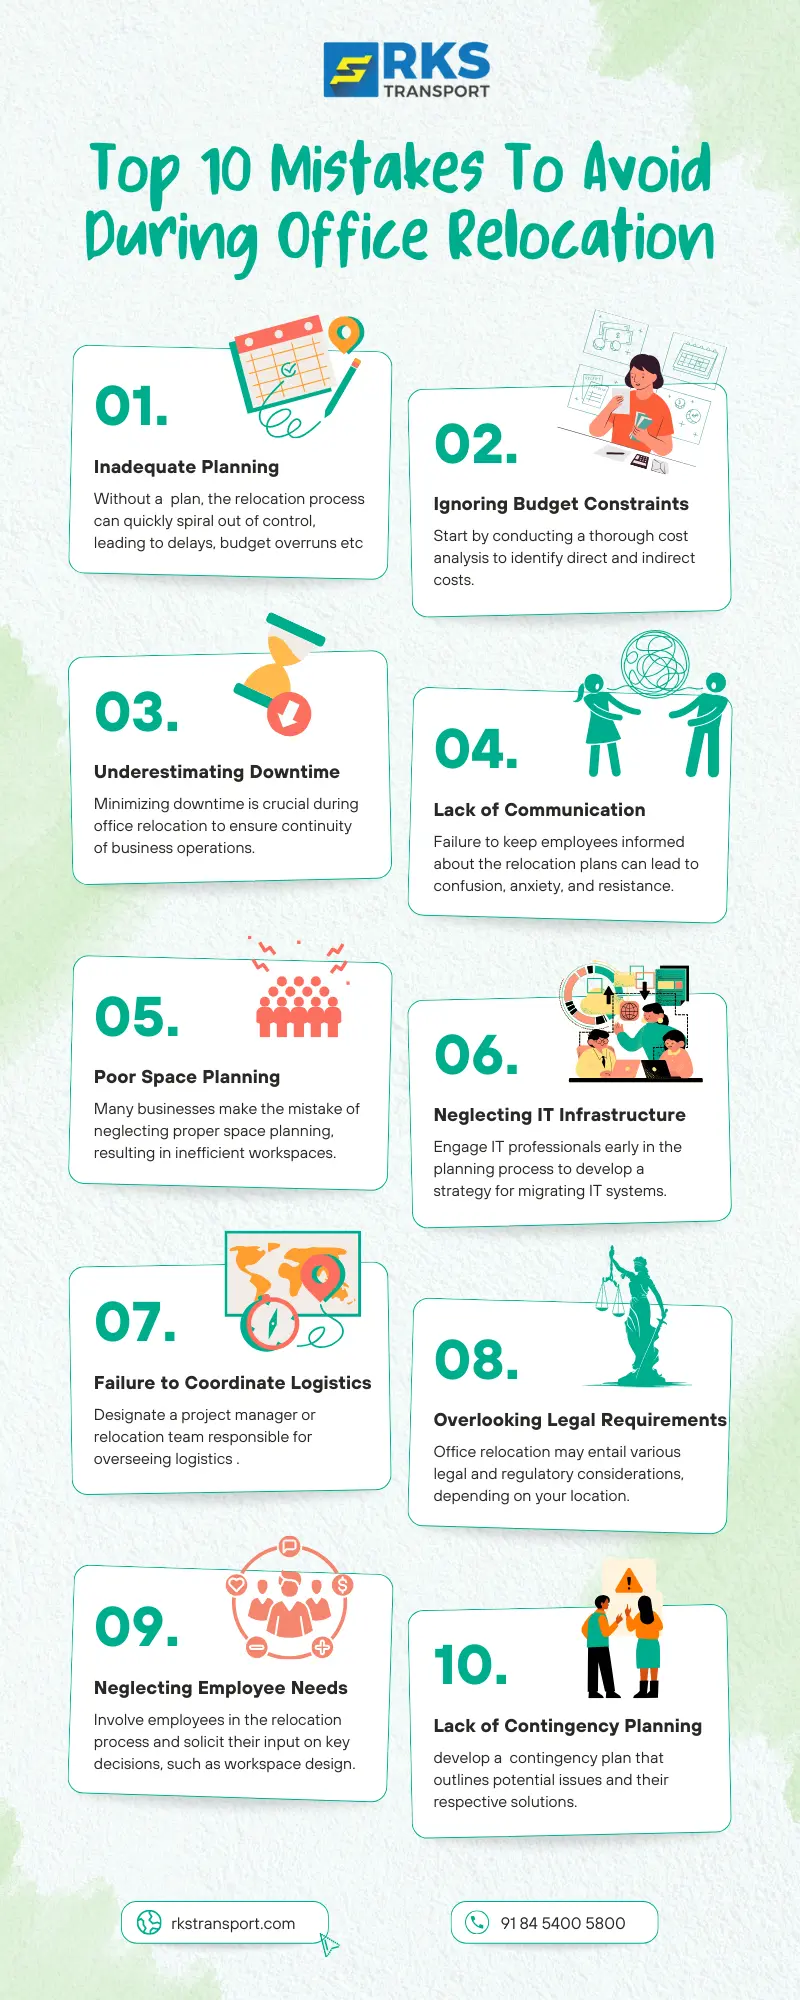 Top 10 Mistakes To Avoid During Office Relocation - Infographic